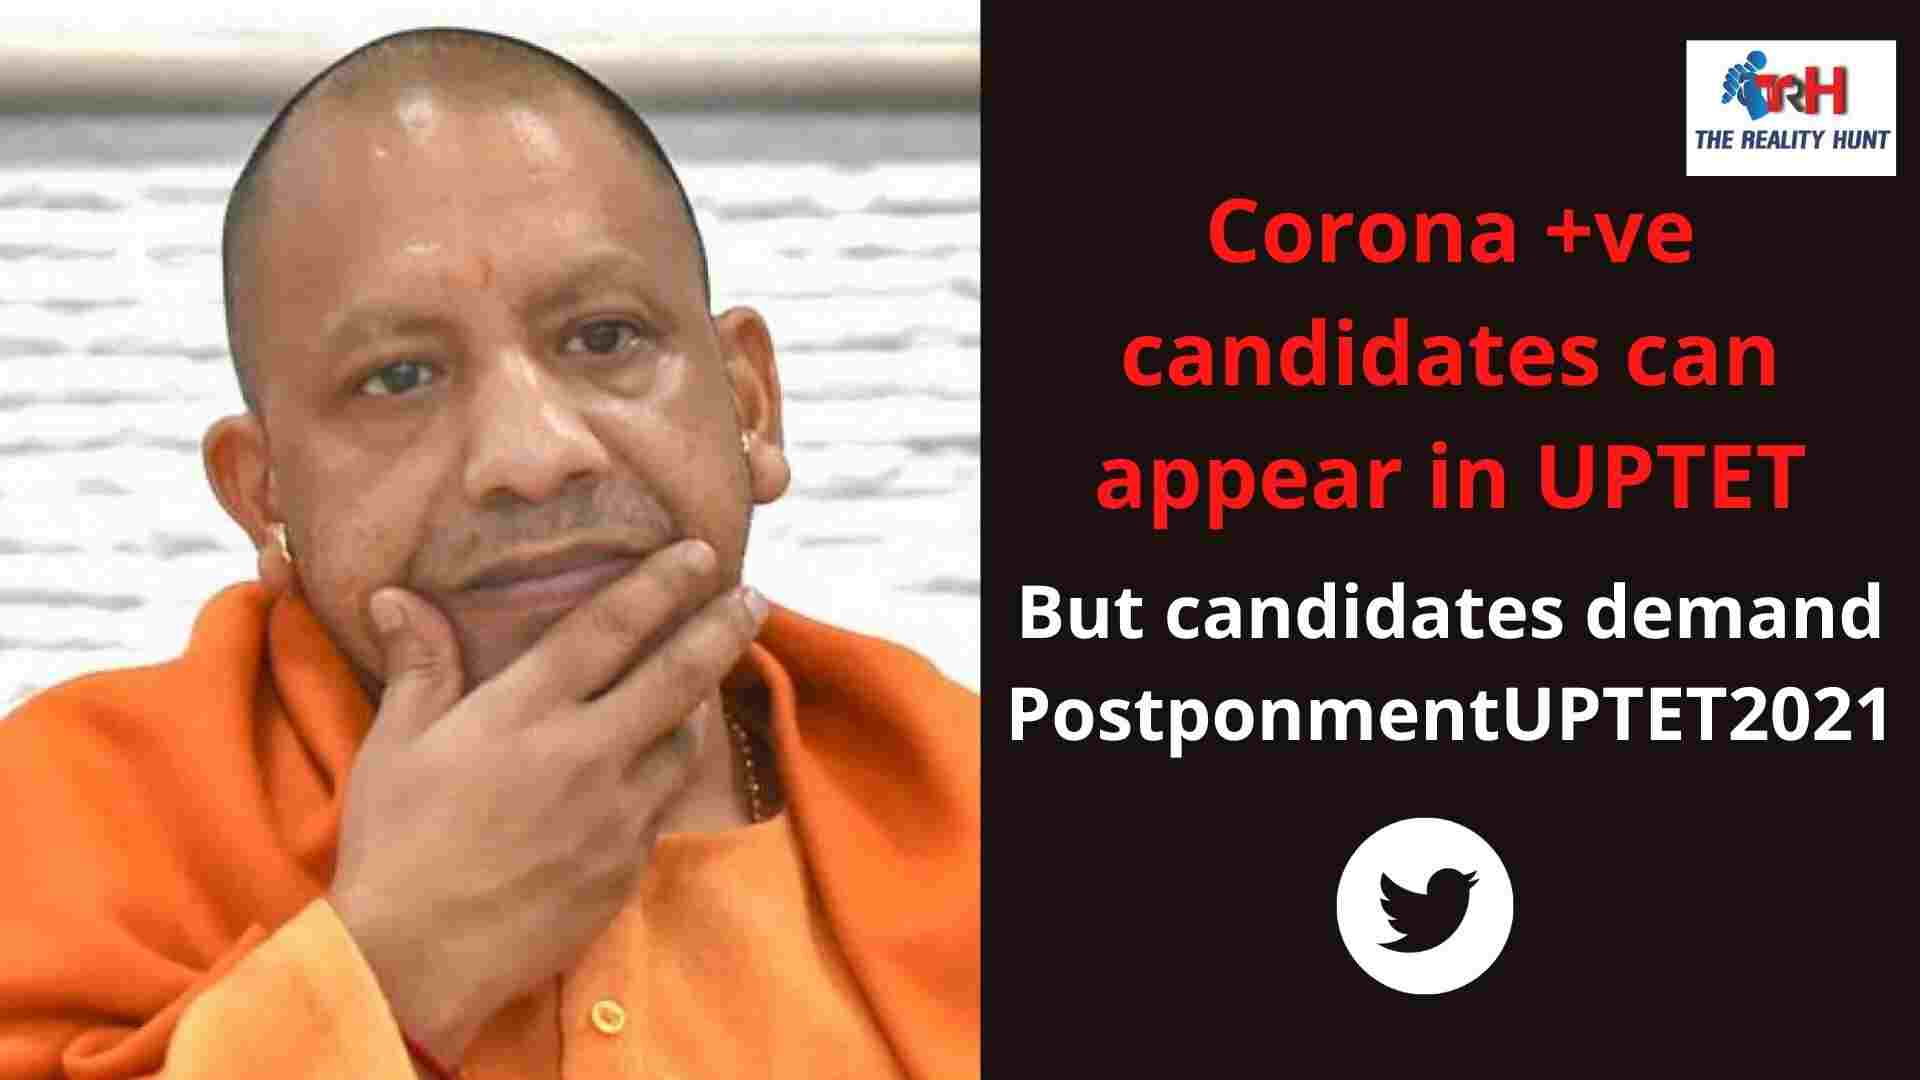 Corona +ve candidates can appear in UPTET but, candidates demanded on Twitter PostponeUptet2021